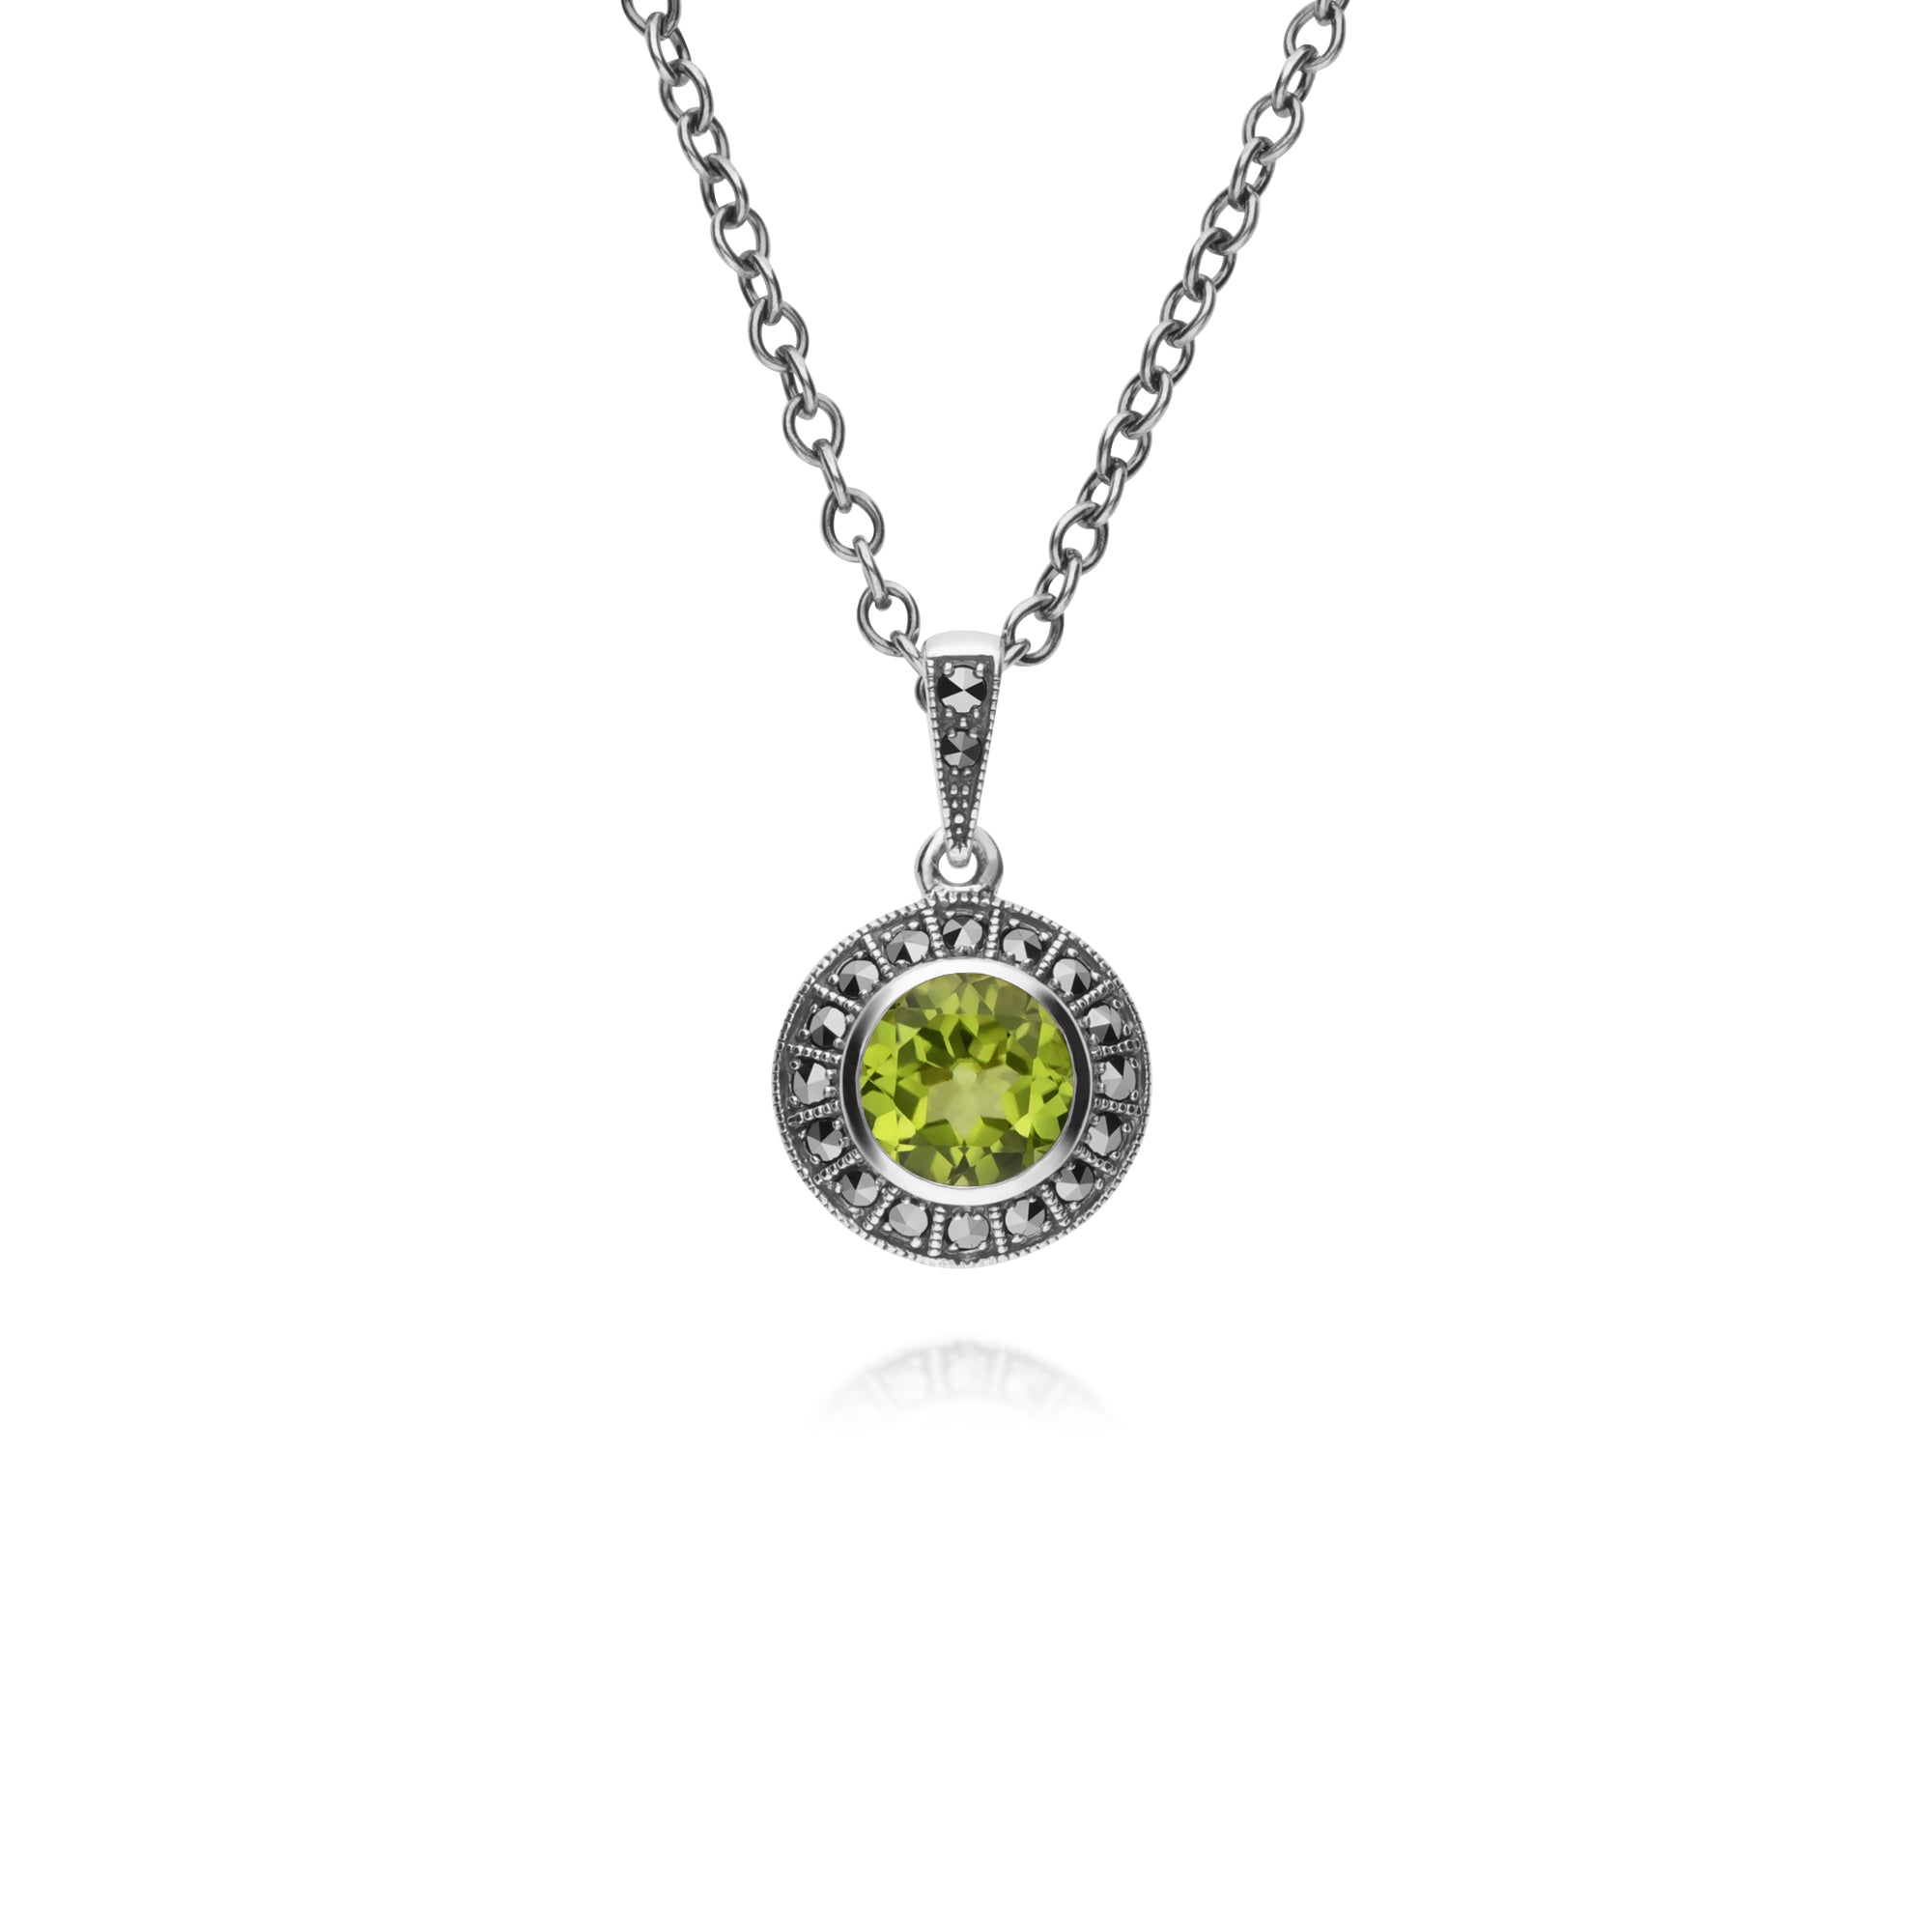 214N707304925-214R605604925 Art Deco Style Round Peridot and Marcasite Cluster Rings & Pendant Set in 925 Sterling Silver 2